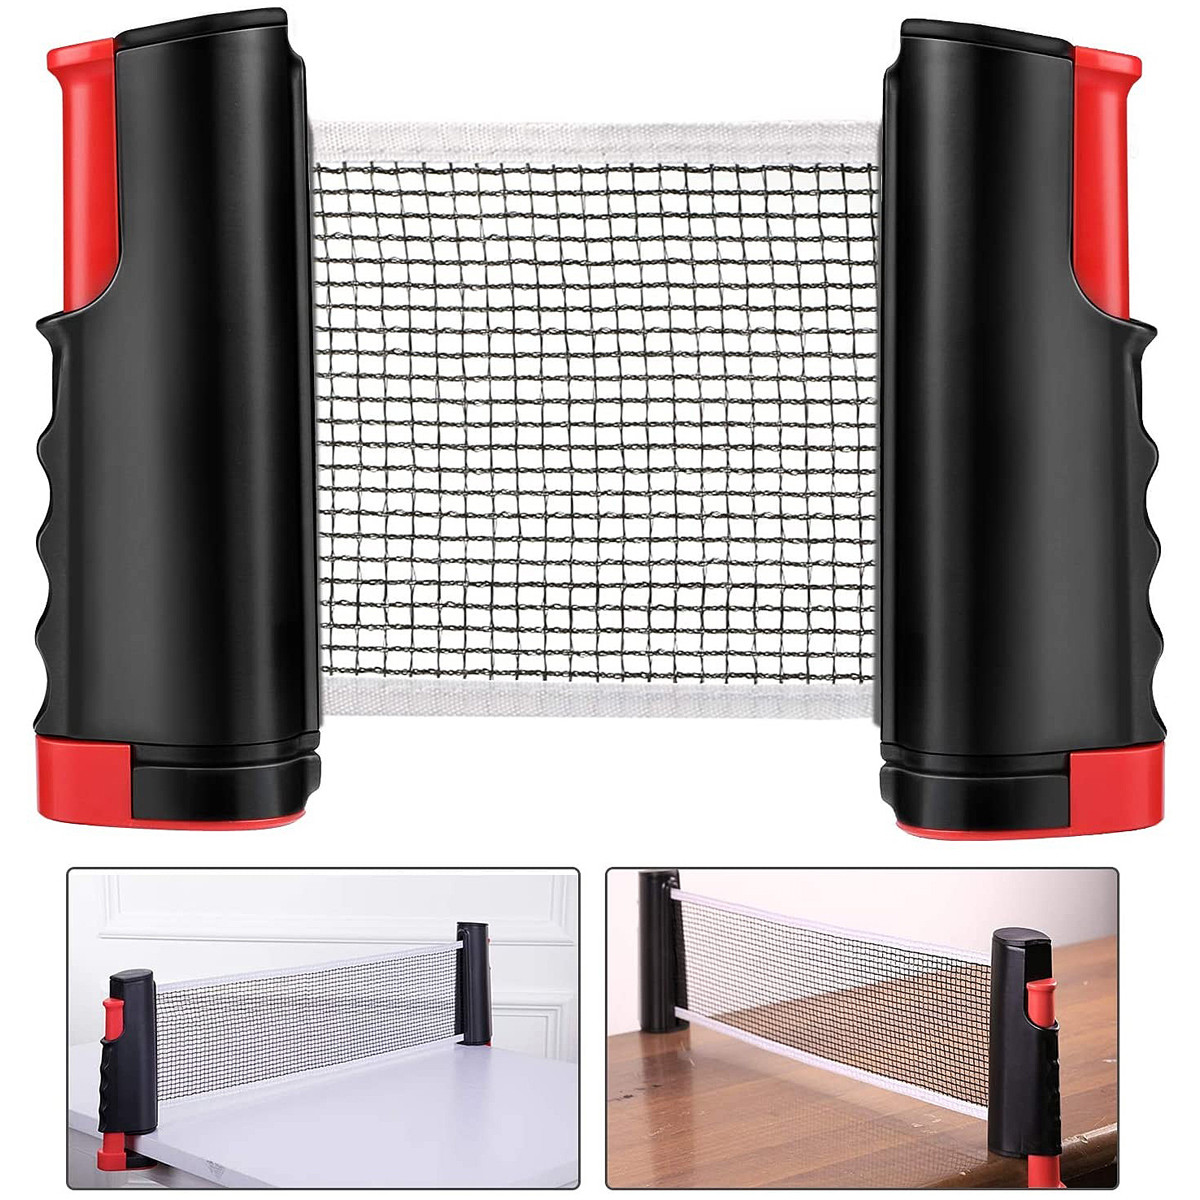 RETRACTABLE NET RED-BLACK - Gift ideas - Christmas